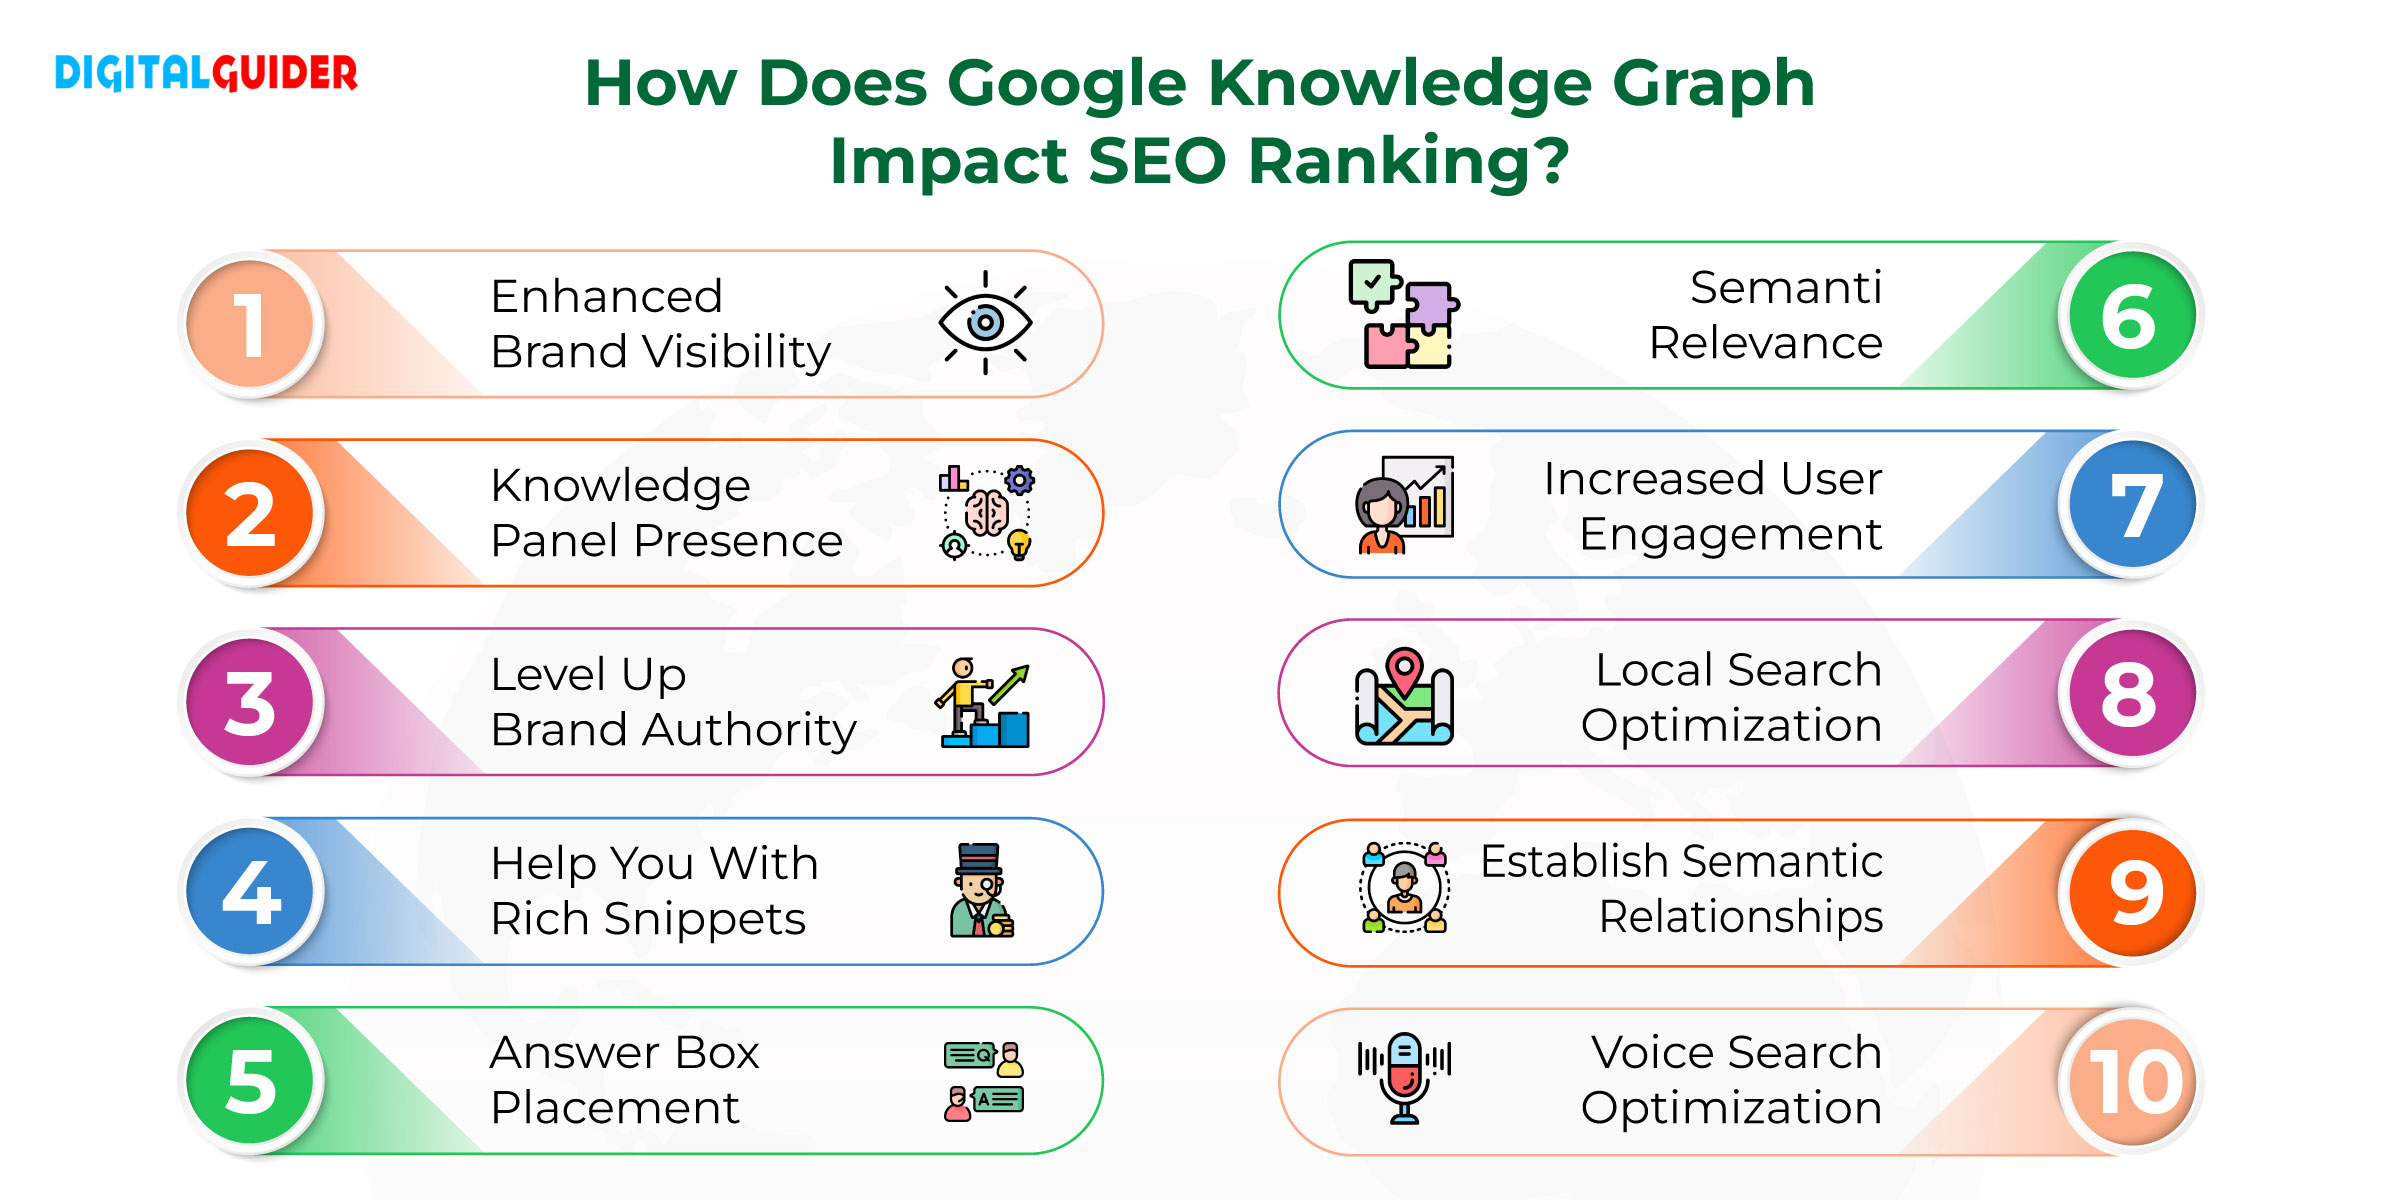 How Does Google Knowledge Graph Impact SEO Ranking